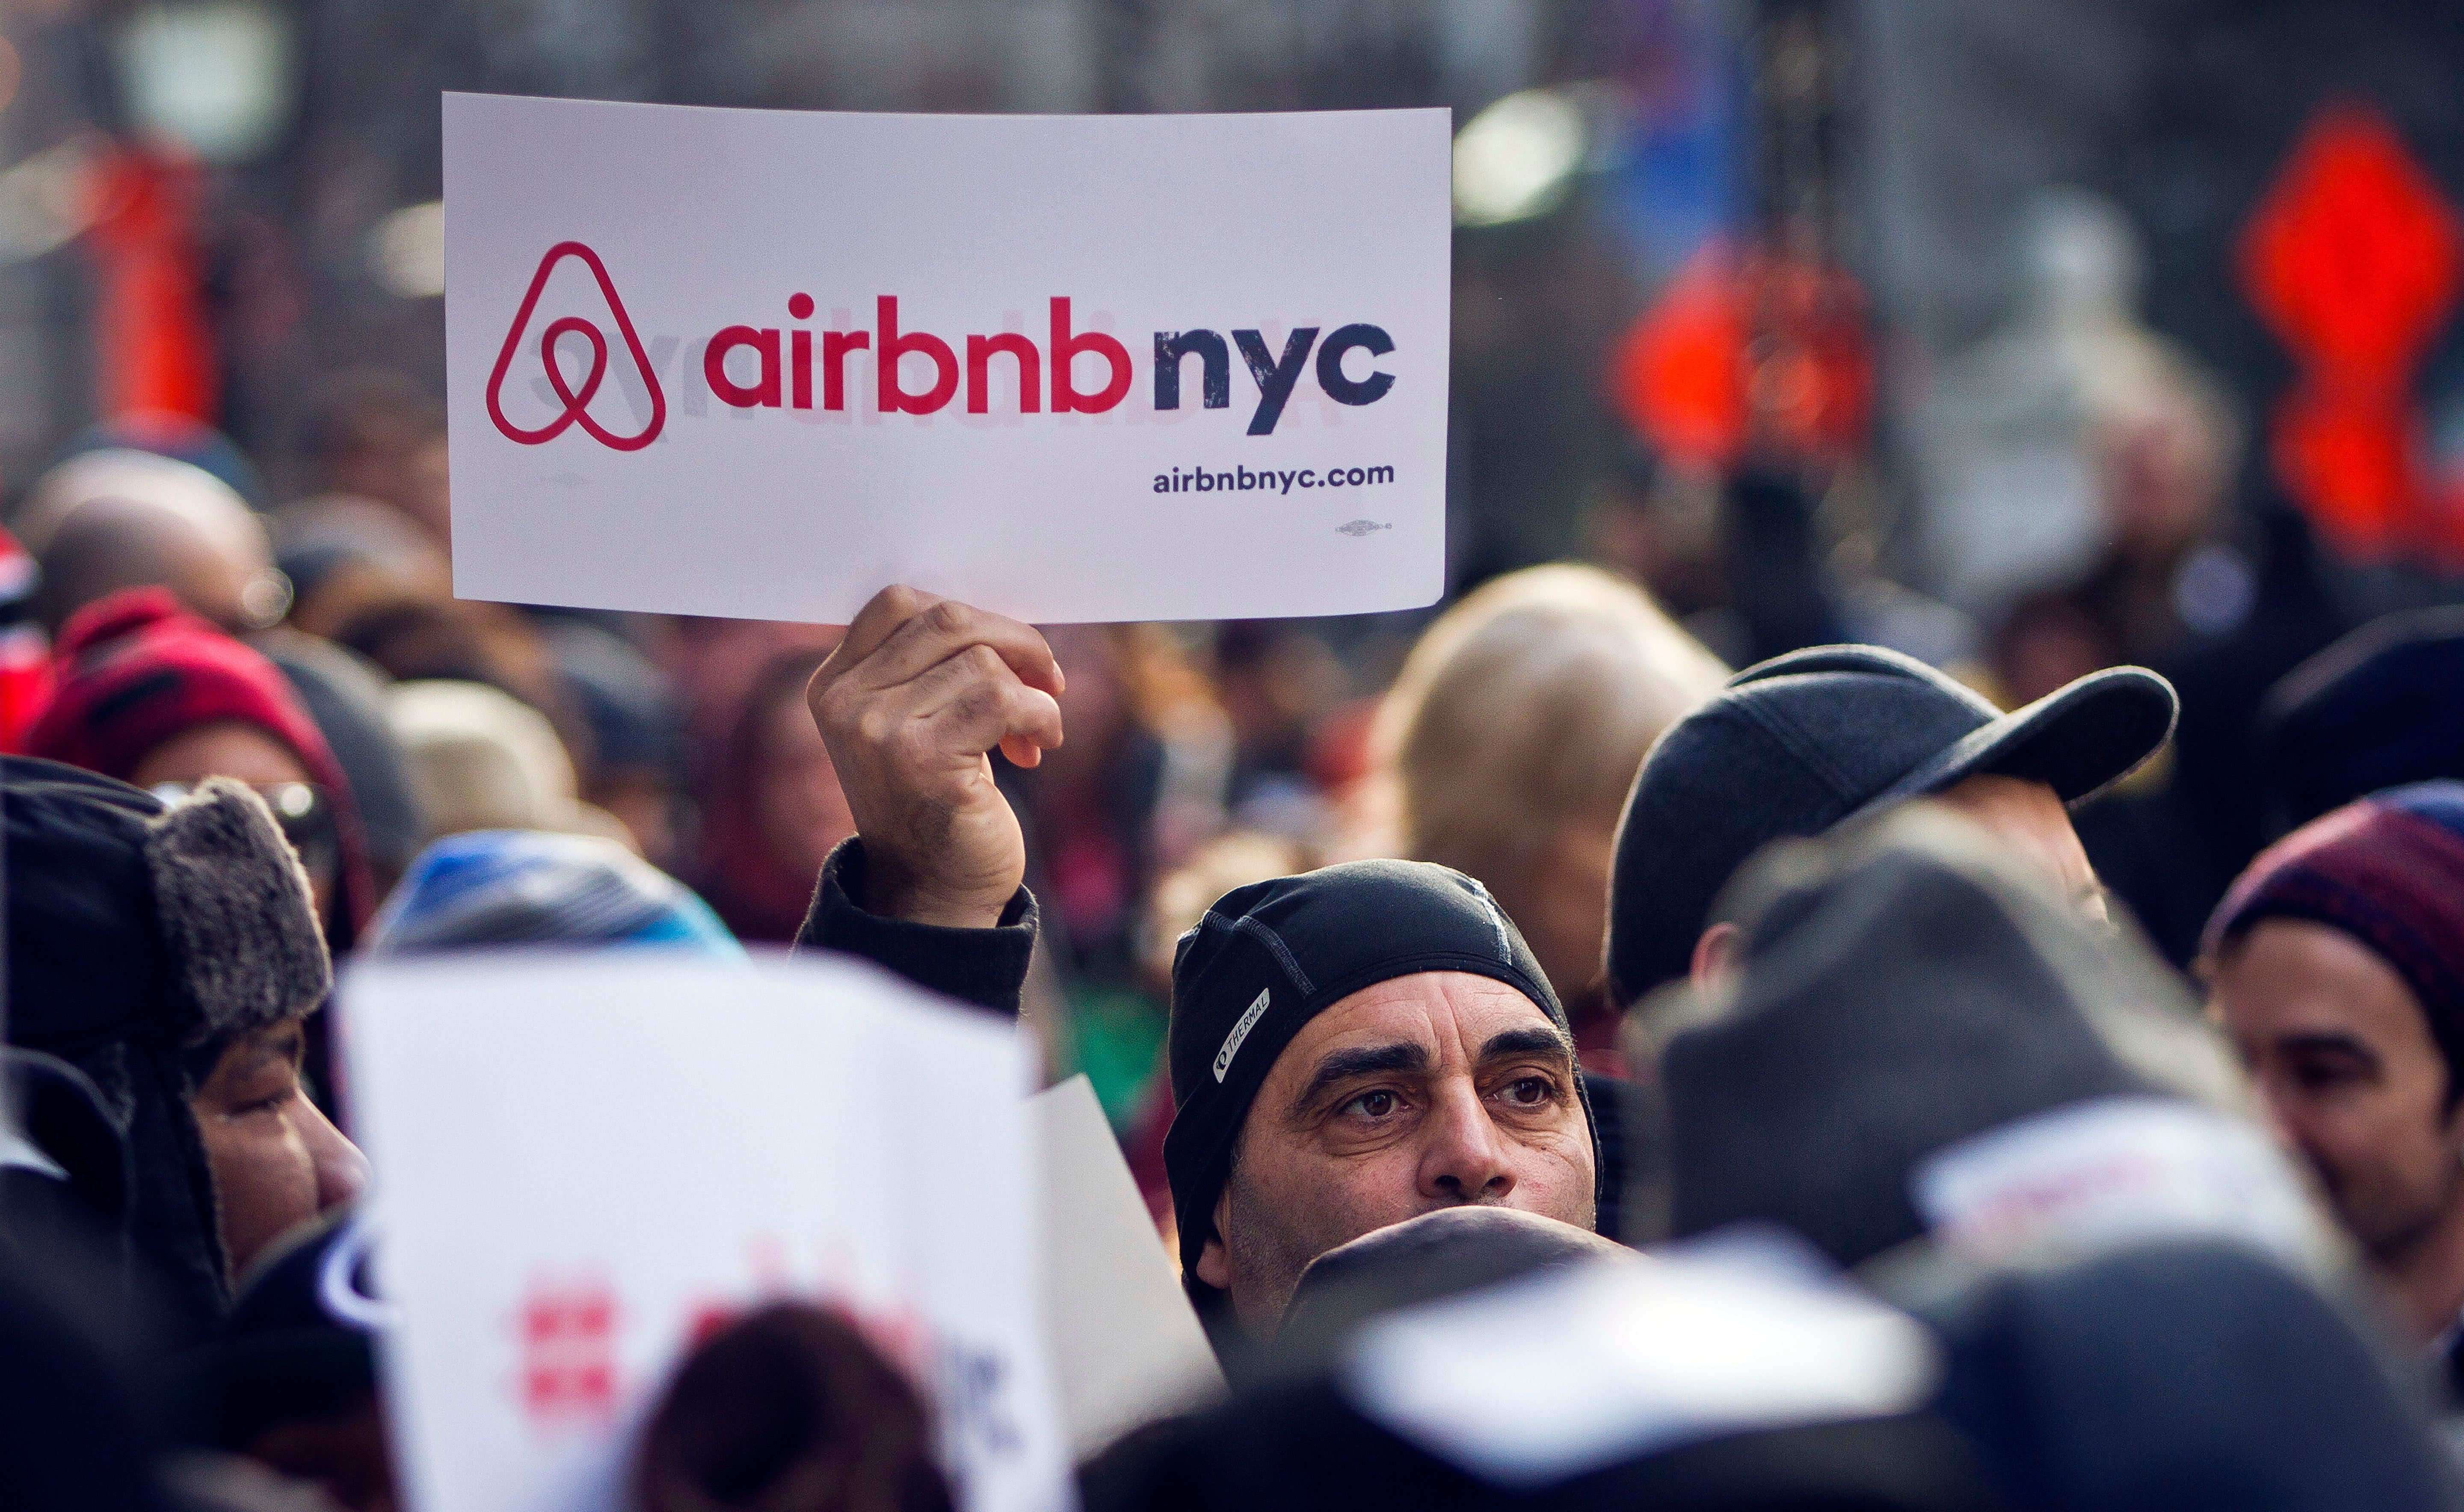 Airbnb called the legislation ‘extreme and oppressive’